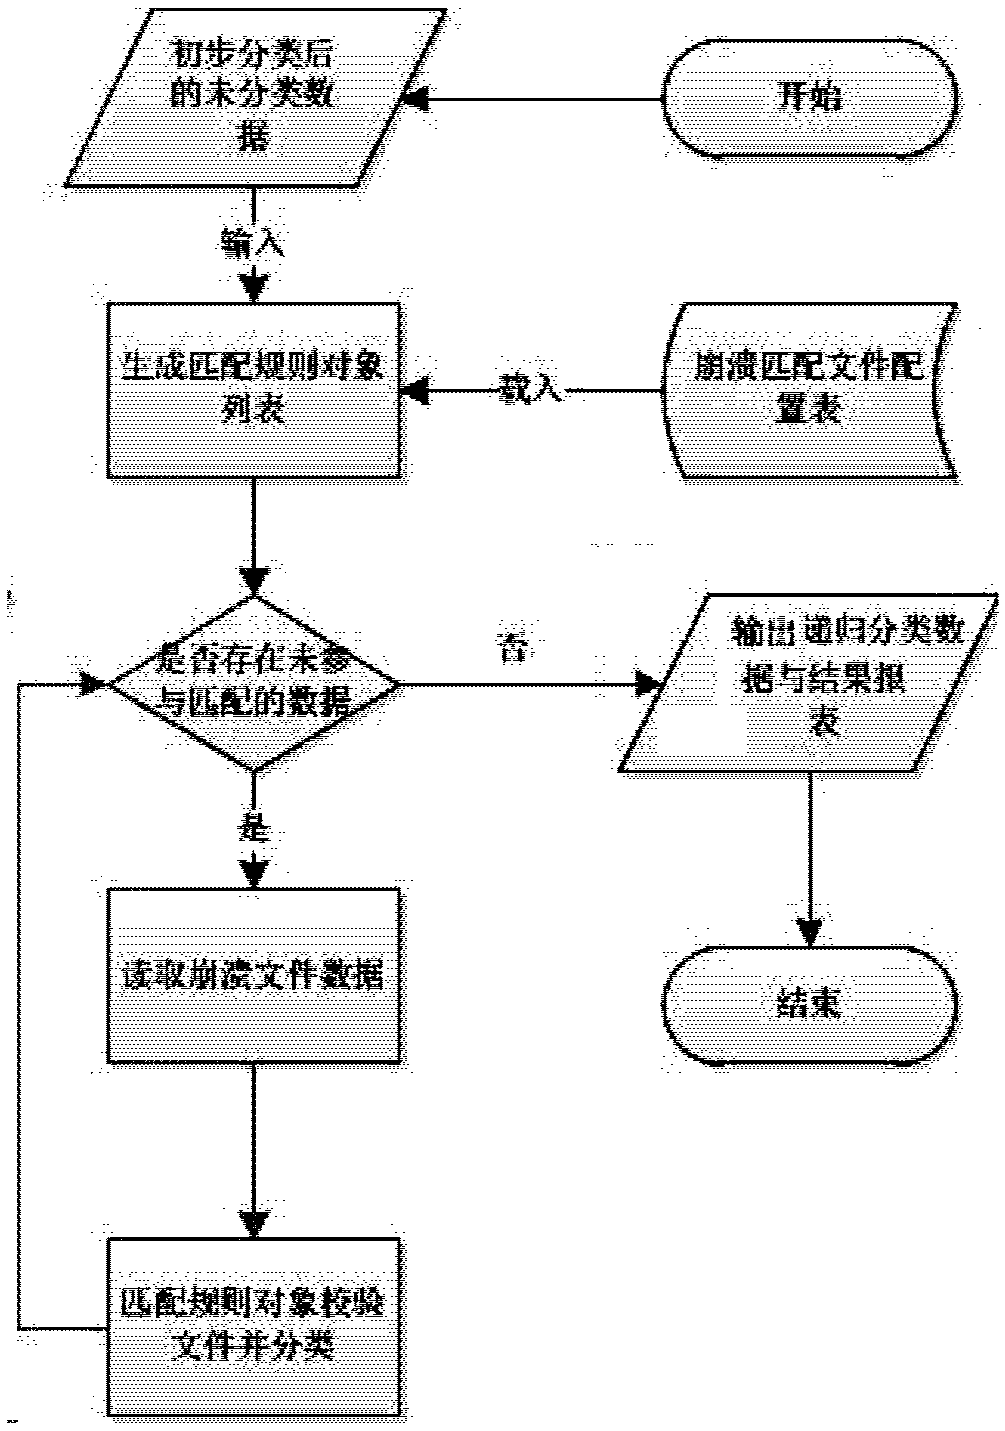 Method and apparatus for classifying and counting iOS (iphone operation system) crash data